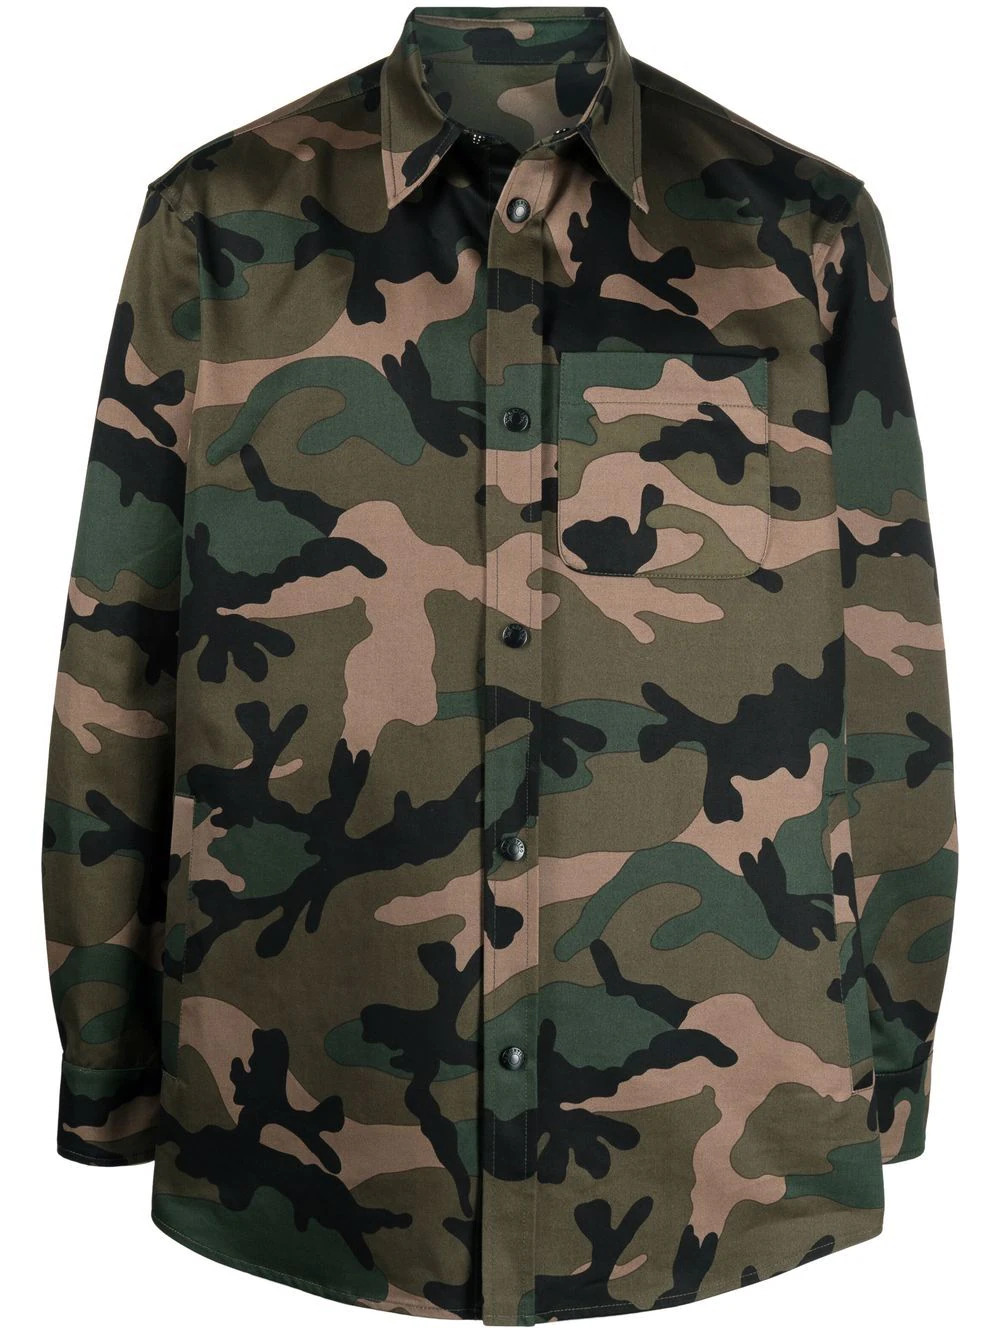 Jacke mit Camouflage-Muster 